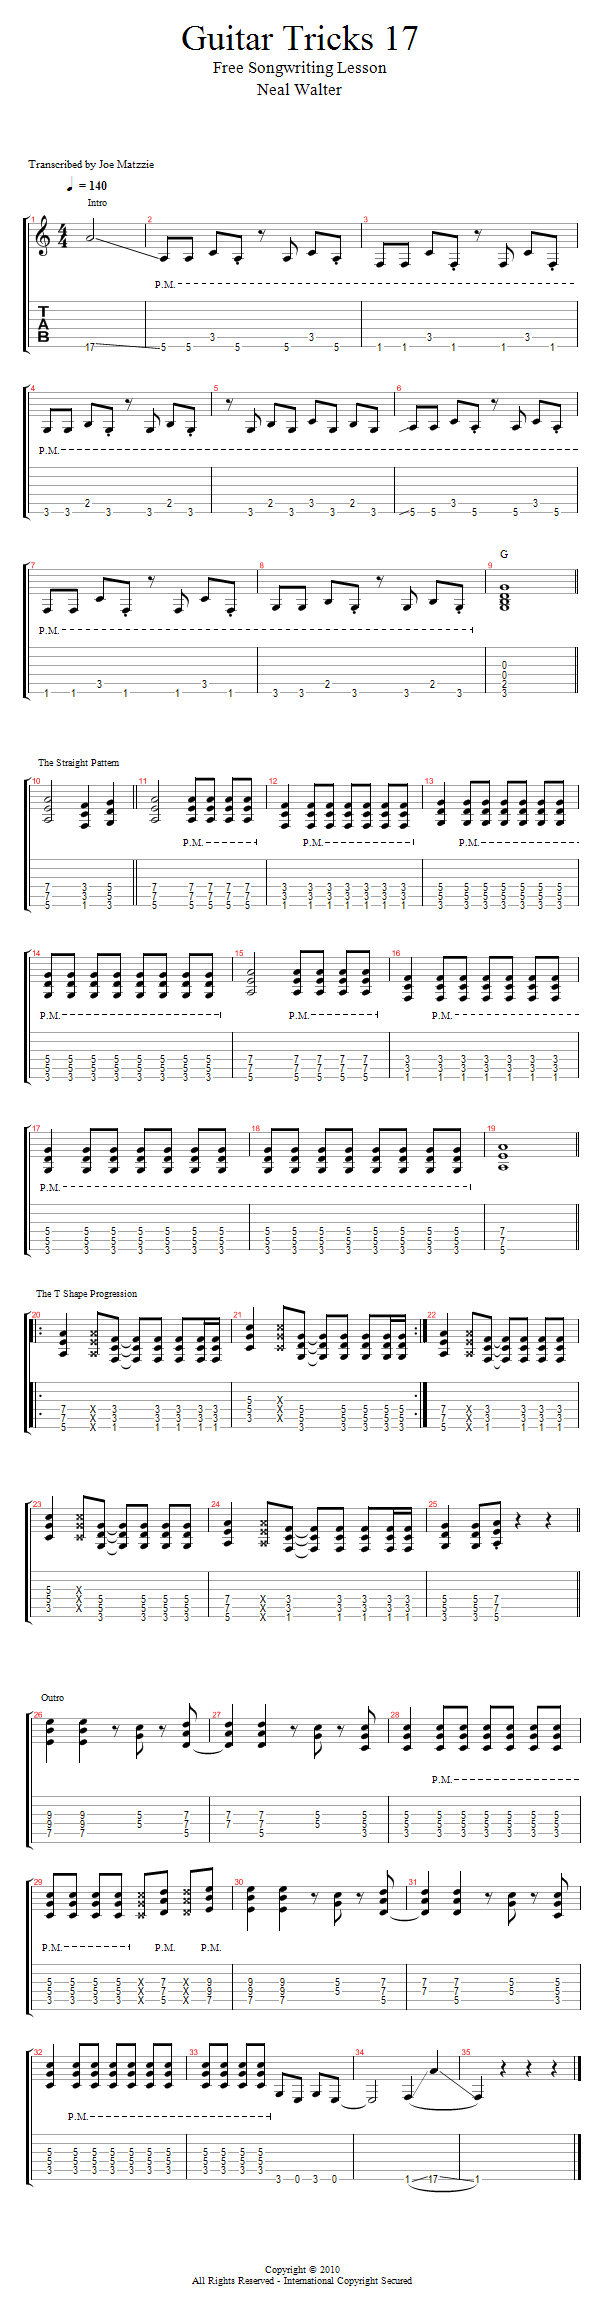 Guitar Tricks 17: Free Songwriting Lesson song notation